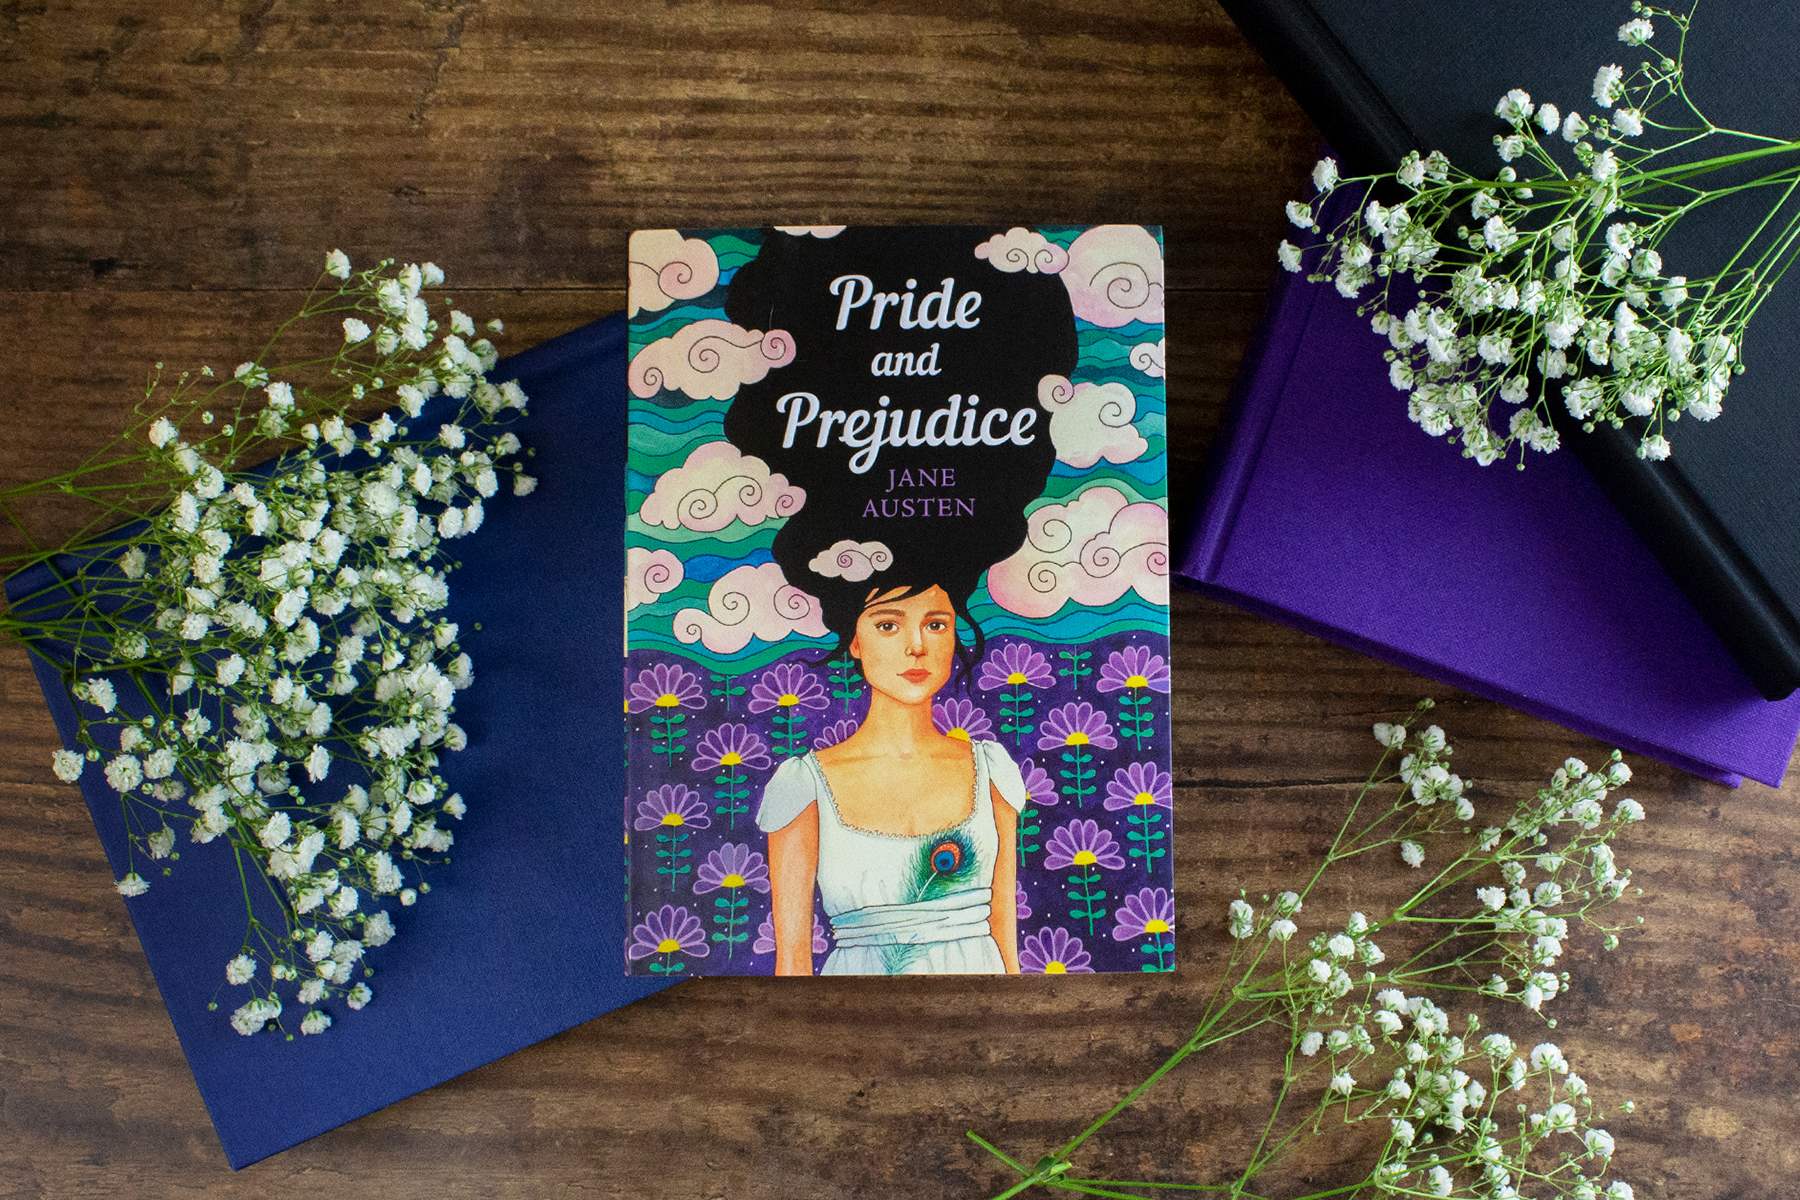 A photo of the book Pride & Prejudice on a wooden table, surrounded by purple books and flowers